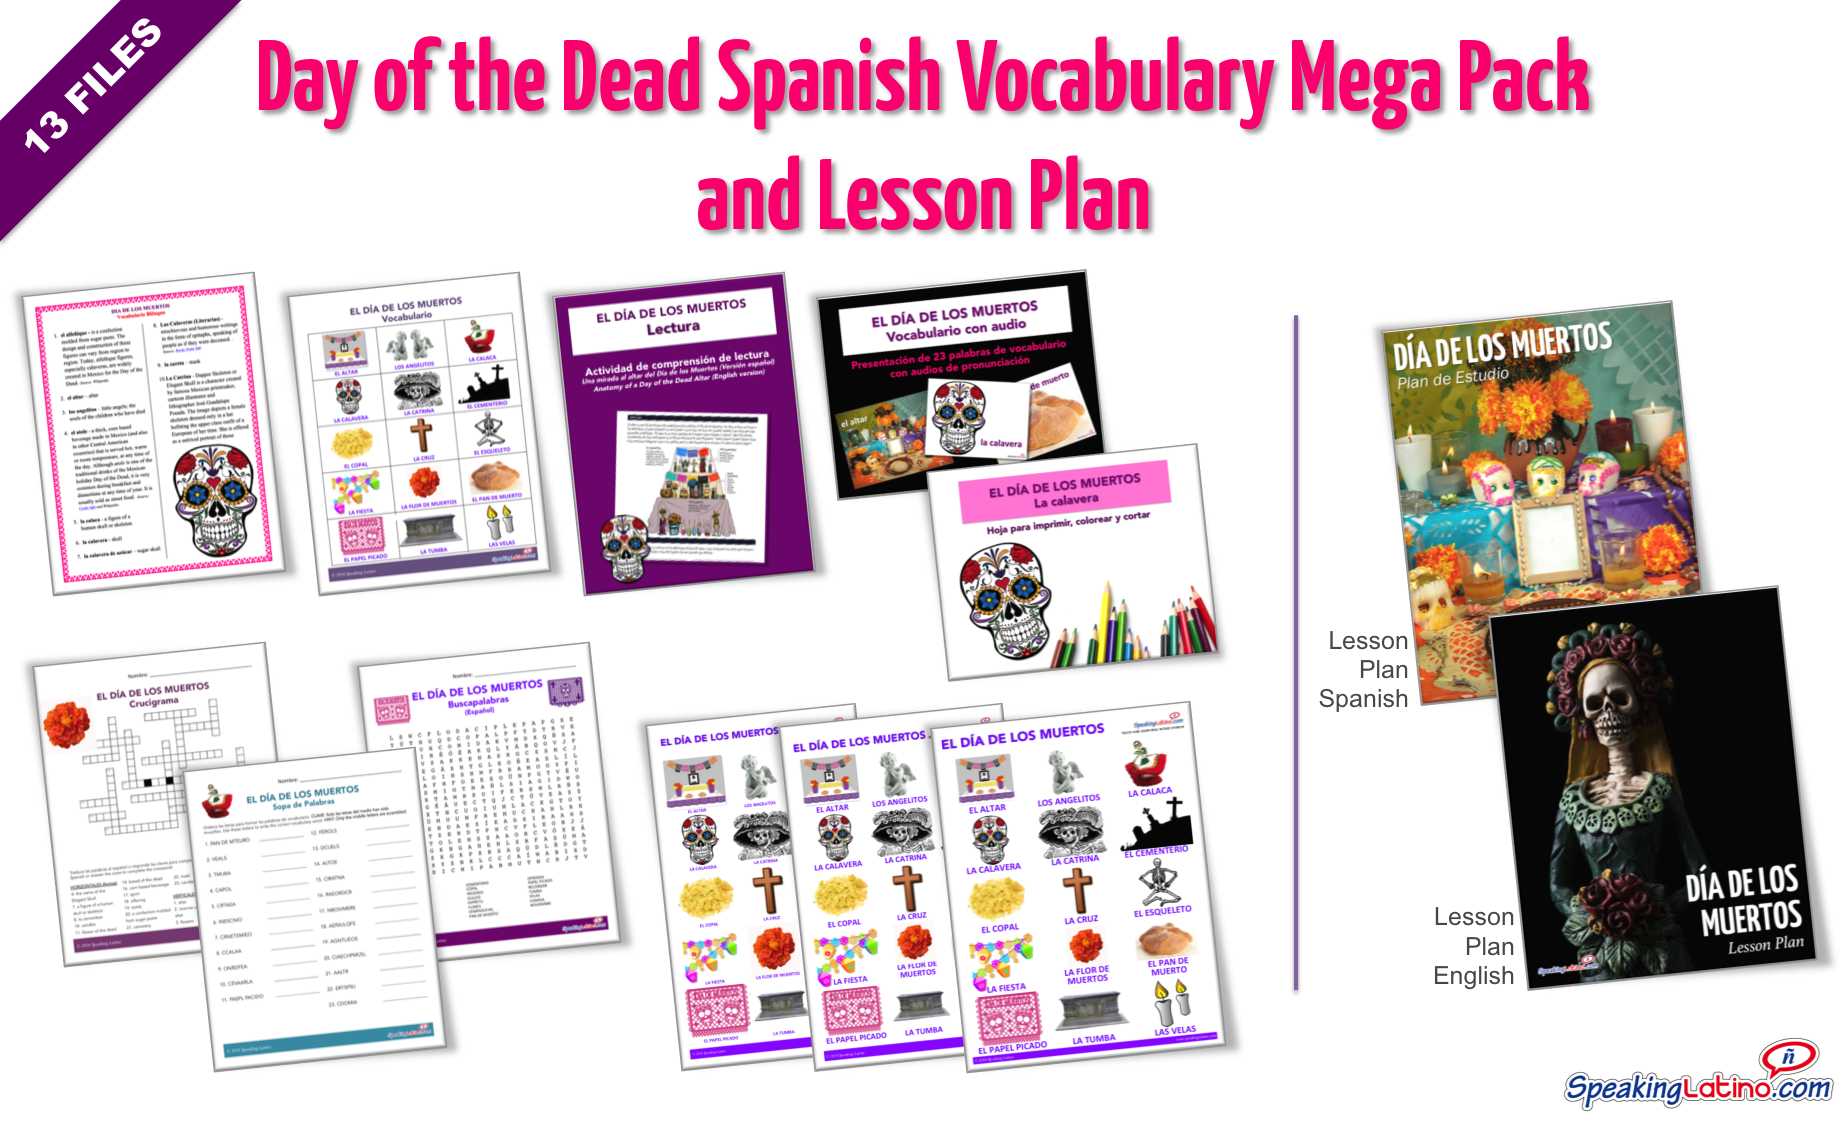 Spanish Worksheets for High School or Day Of the Dead Spanish Activity Mega Pack and Lesson Plan for